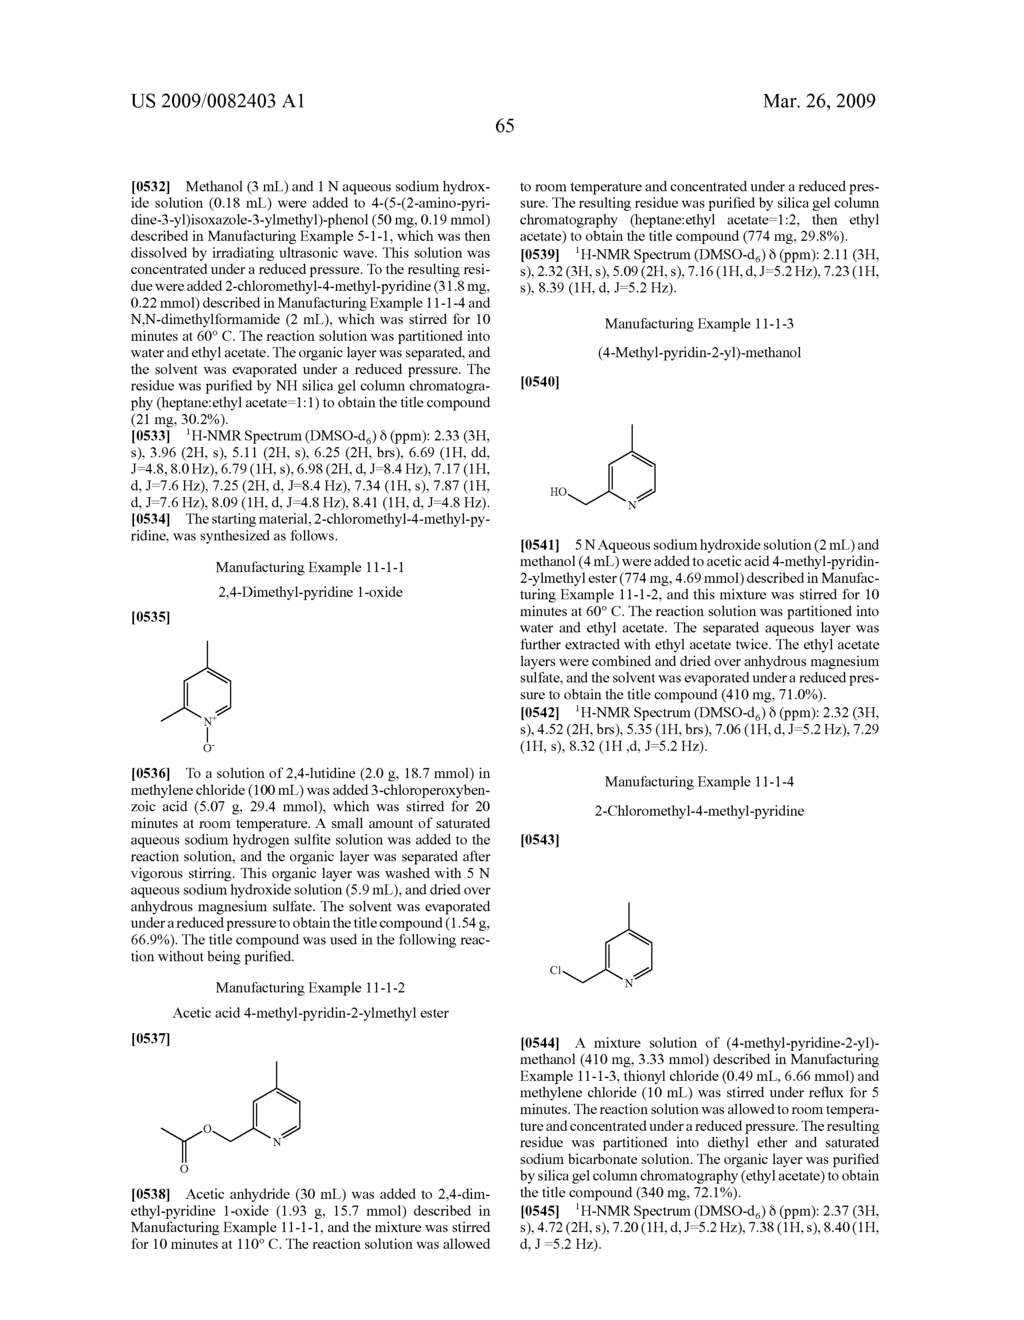 PYRIDINE DERIVATIVES SUBSTITUTED BY HETEROCYCLIC RING AND PHOSPHONOAMINO GROUP, AND ANTI-FUNGAL AGENT CONTAINING SAME - diagram, schematic, and image 66